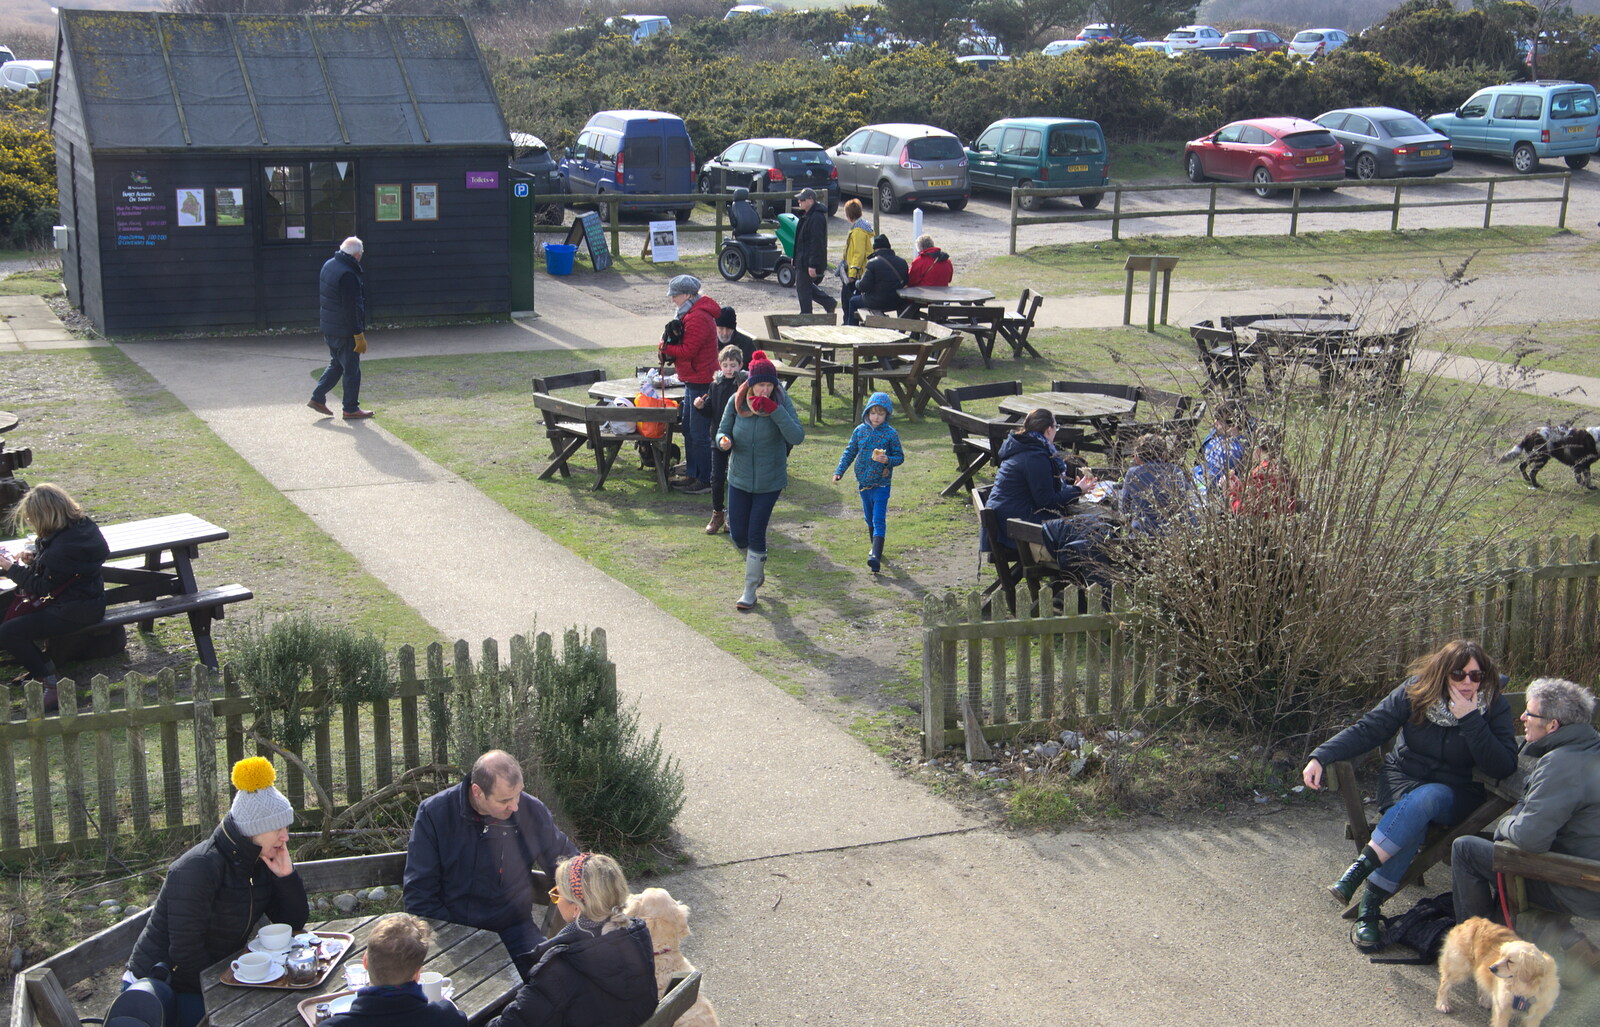 The gang roam around in the NT picnic area from A Trip to Dunwich Heath, Dunwich, Suffolk - 17th February 2019